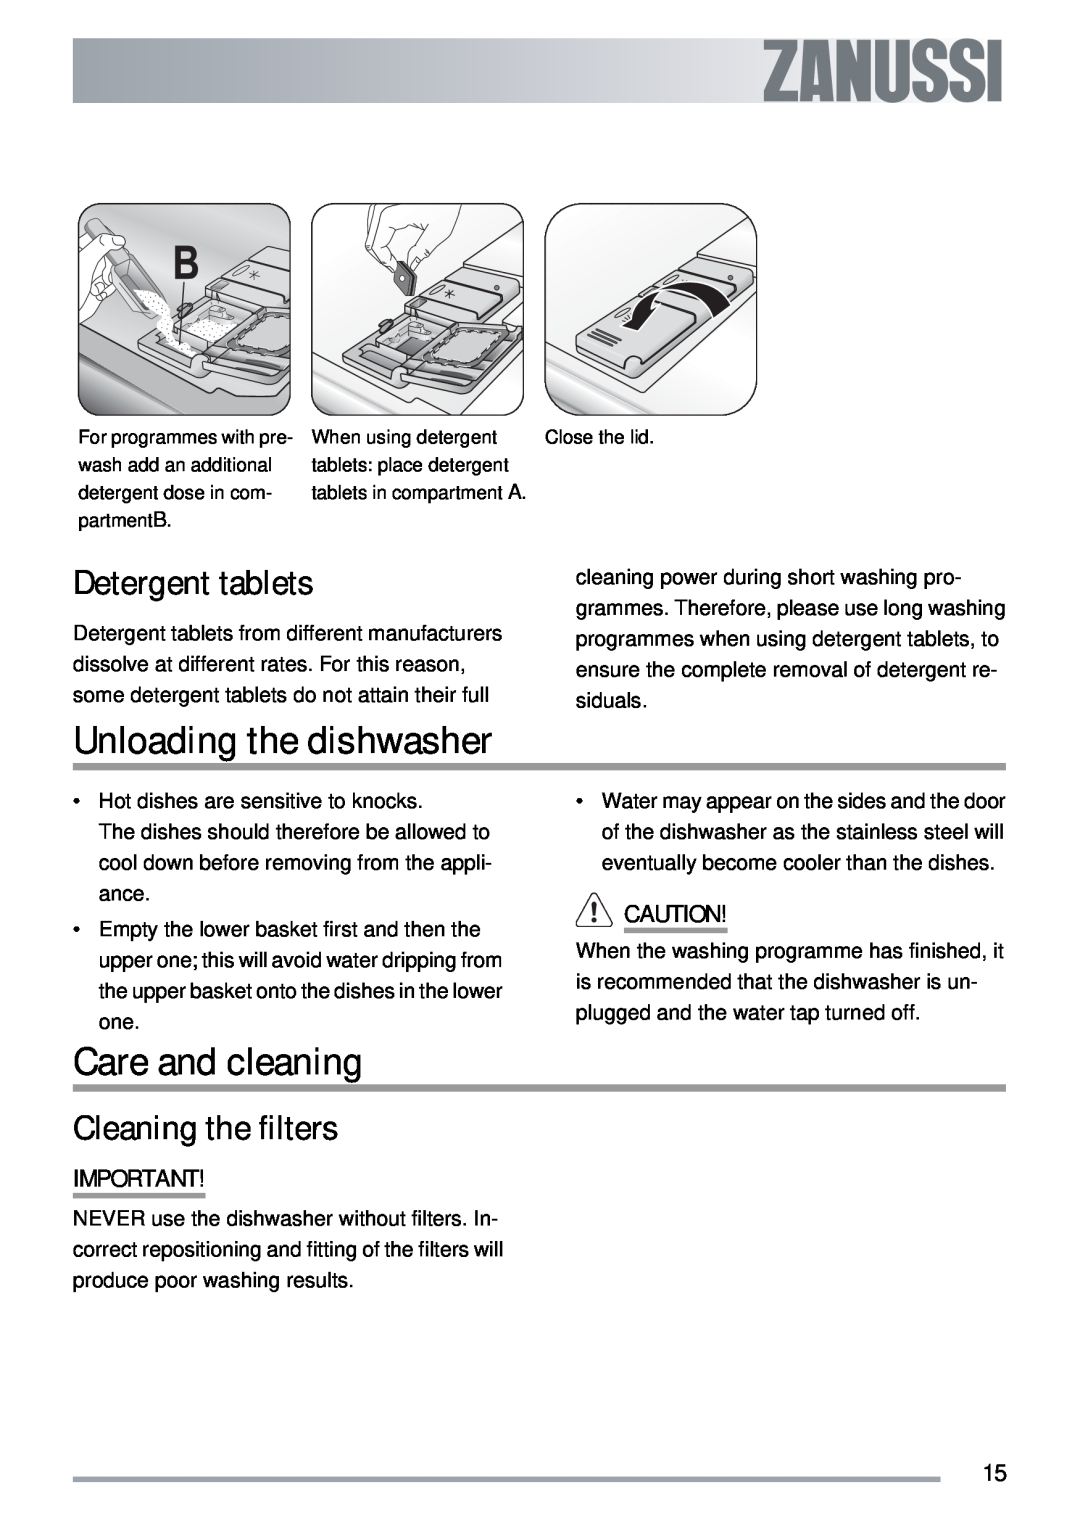 Zanussi ZSF 4143 user manual Unloading the dishwasher, Care and cleaning, Detergent tablets, Cleaning the filters 